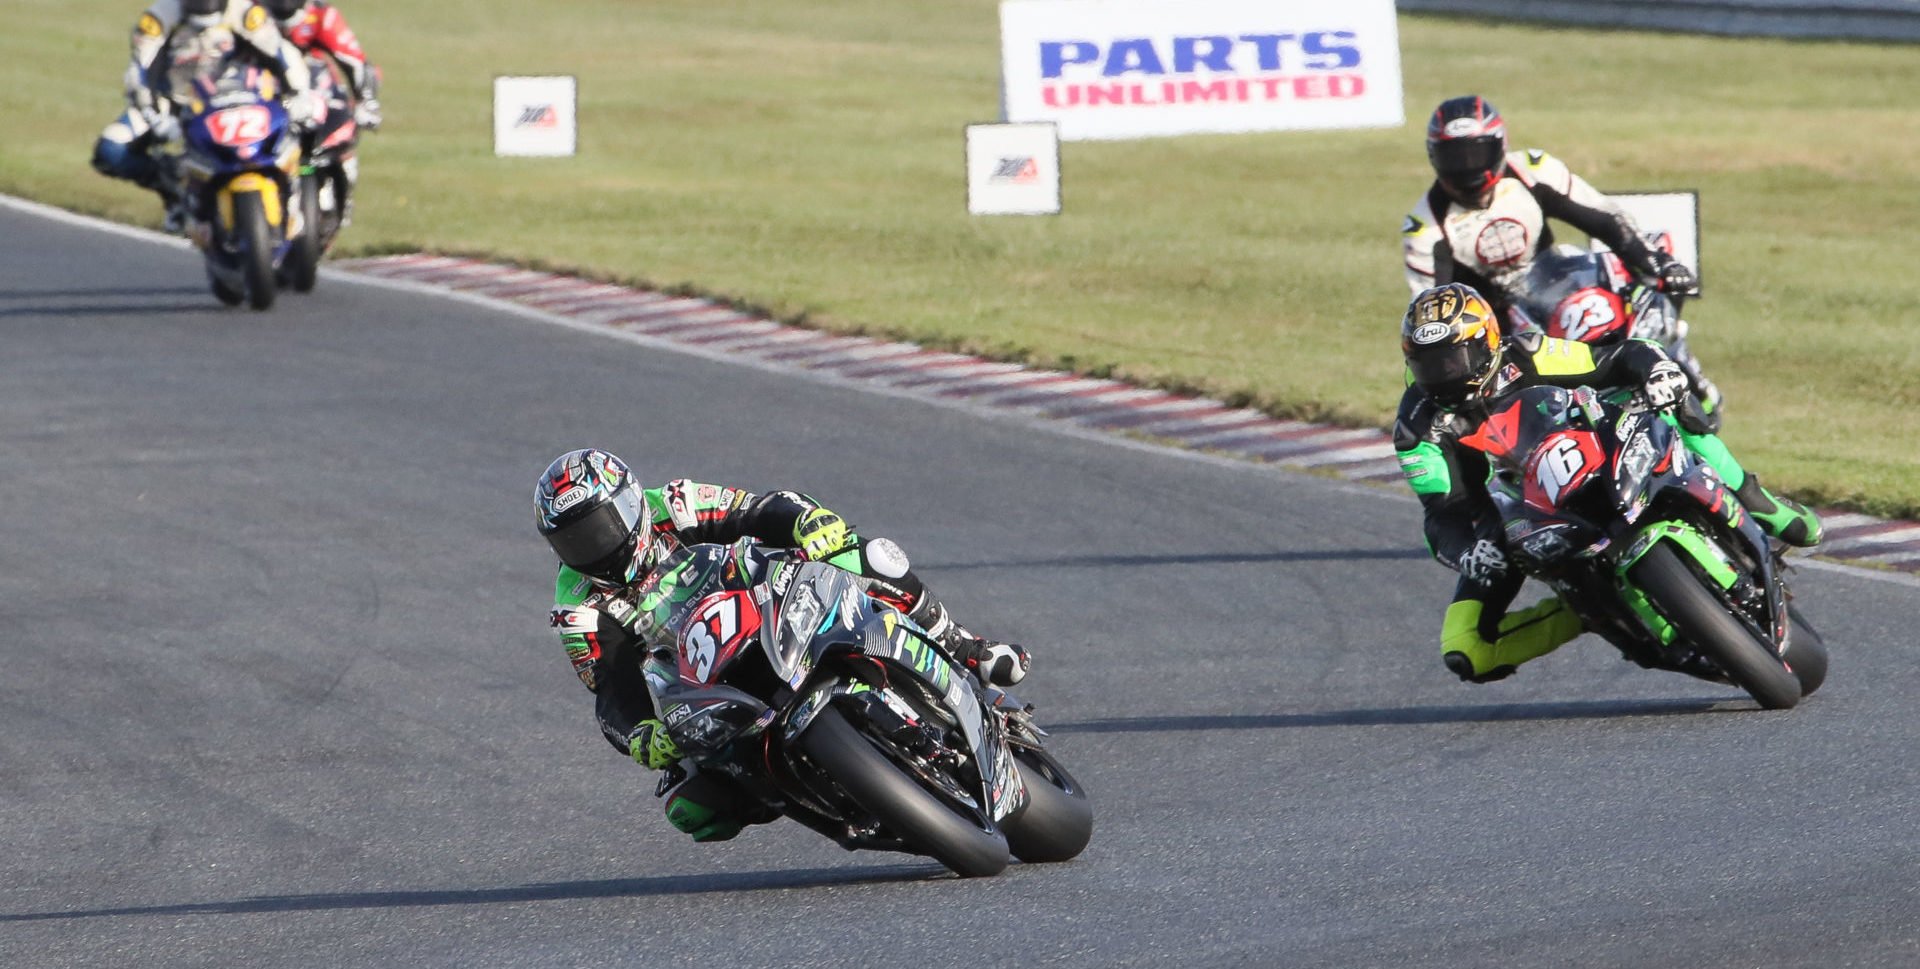 Stefano Mesa (37) leading Frankie Babuska, Jr. (16), Corey Alexander (23), and Miles Thornton (72) during the MotoAmerica Stock 1000 race at New Jersey Motorsports Park in 2019. Photo by Brian J. Nelson.